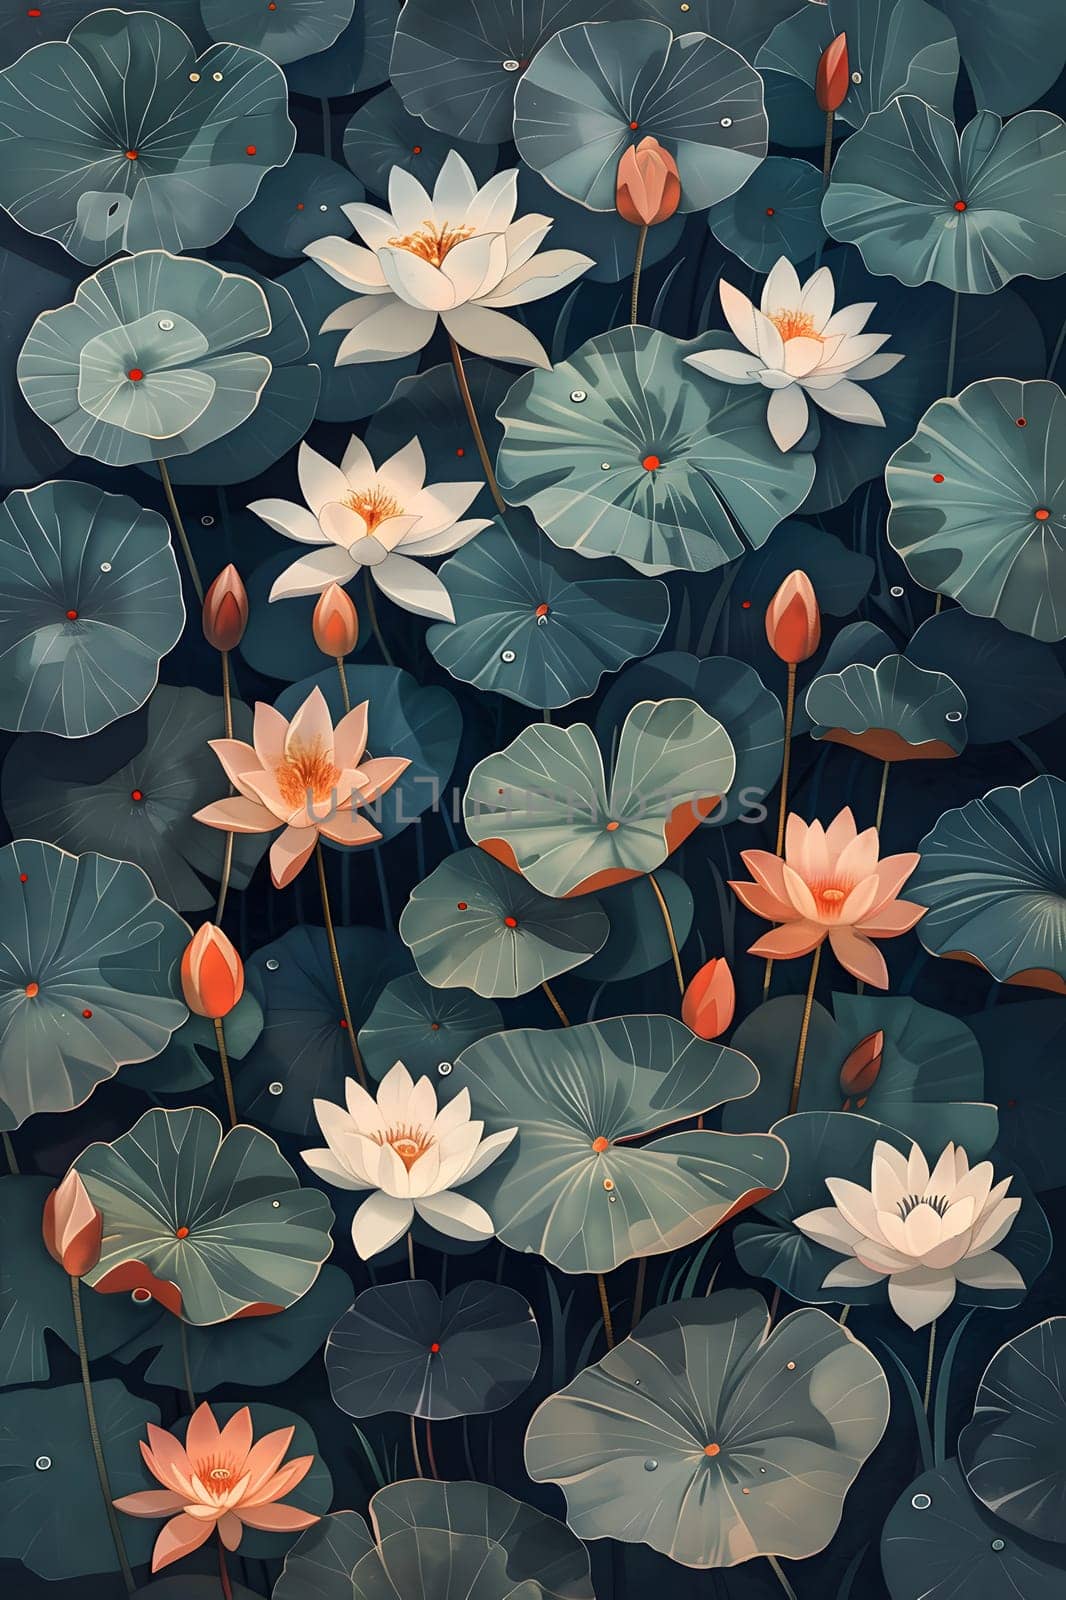 A painting depicting water lilies and lily pads in a serene pond, showcasing the beauty and tranquility of aquatic plants like the sacred lotus